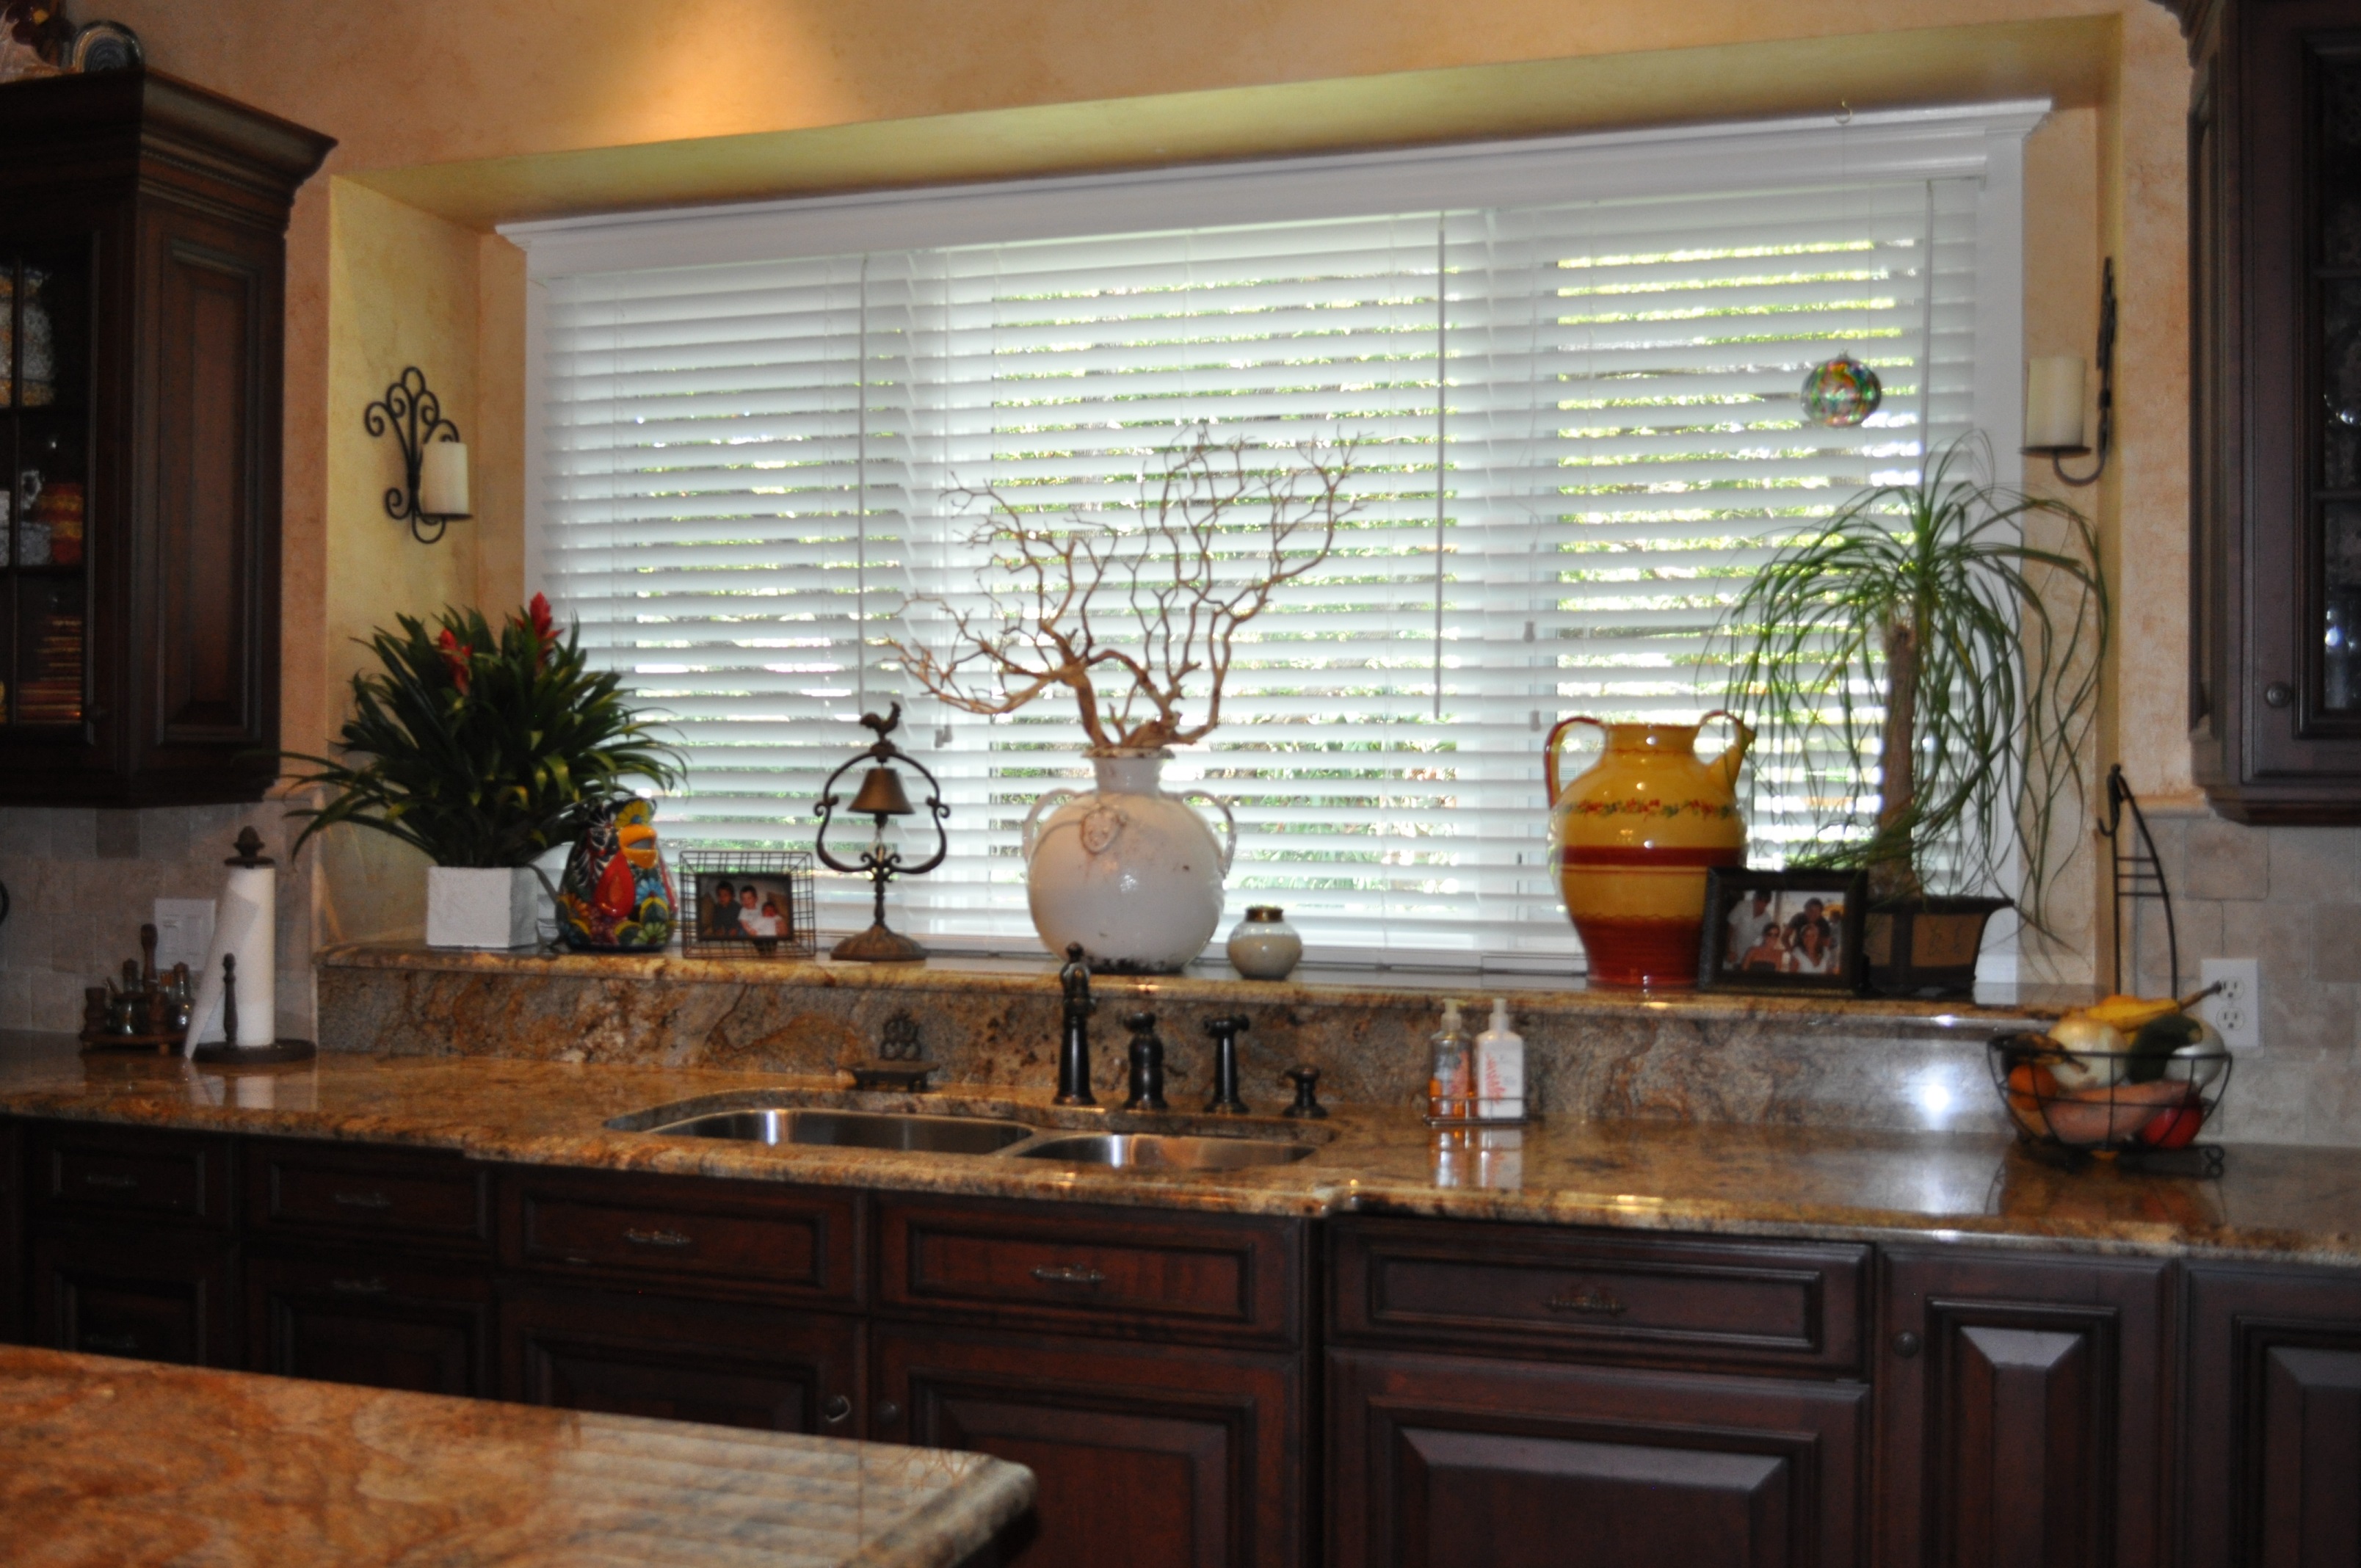 plantation shutters Haines City, window blinds, roller shades